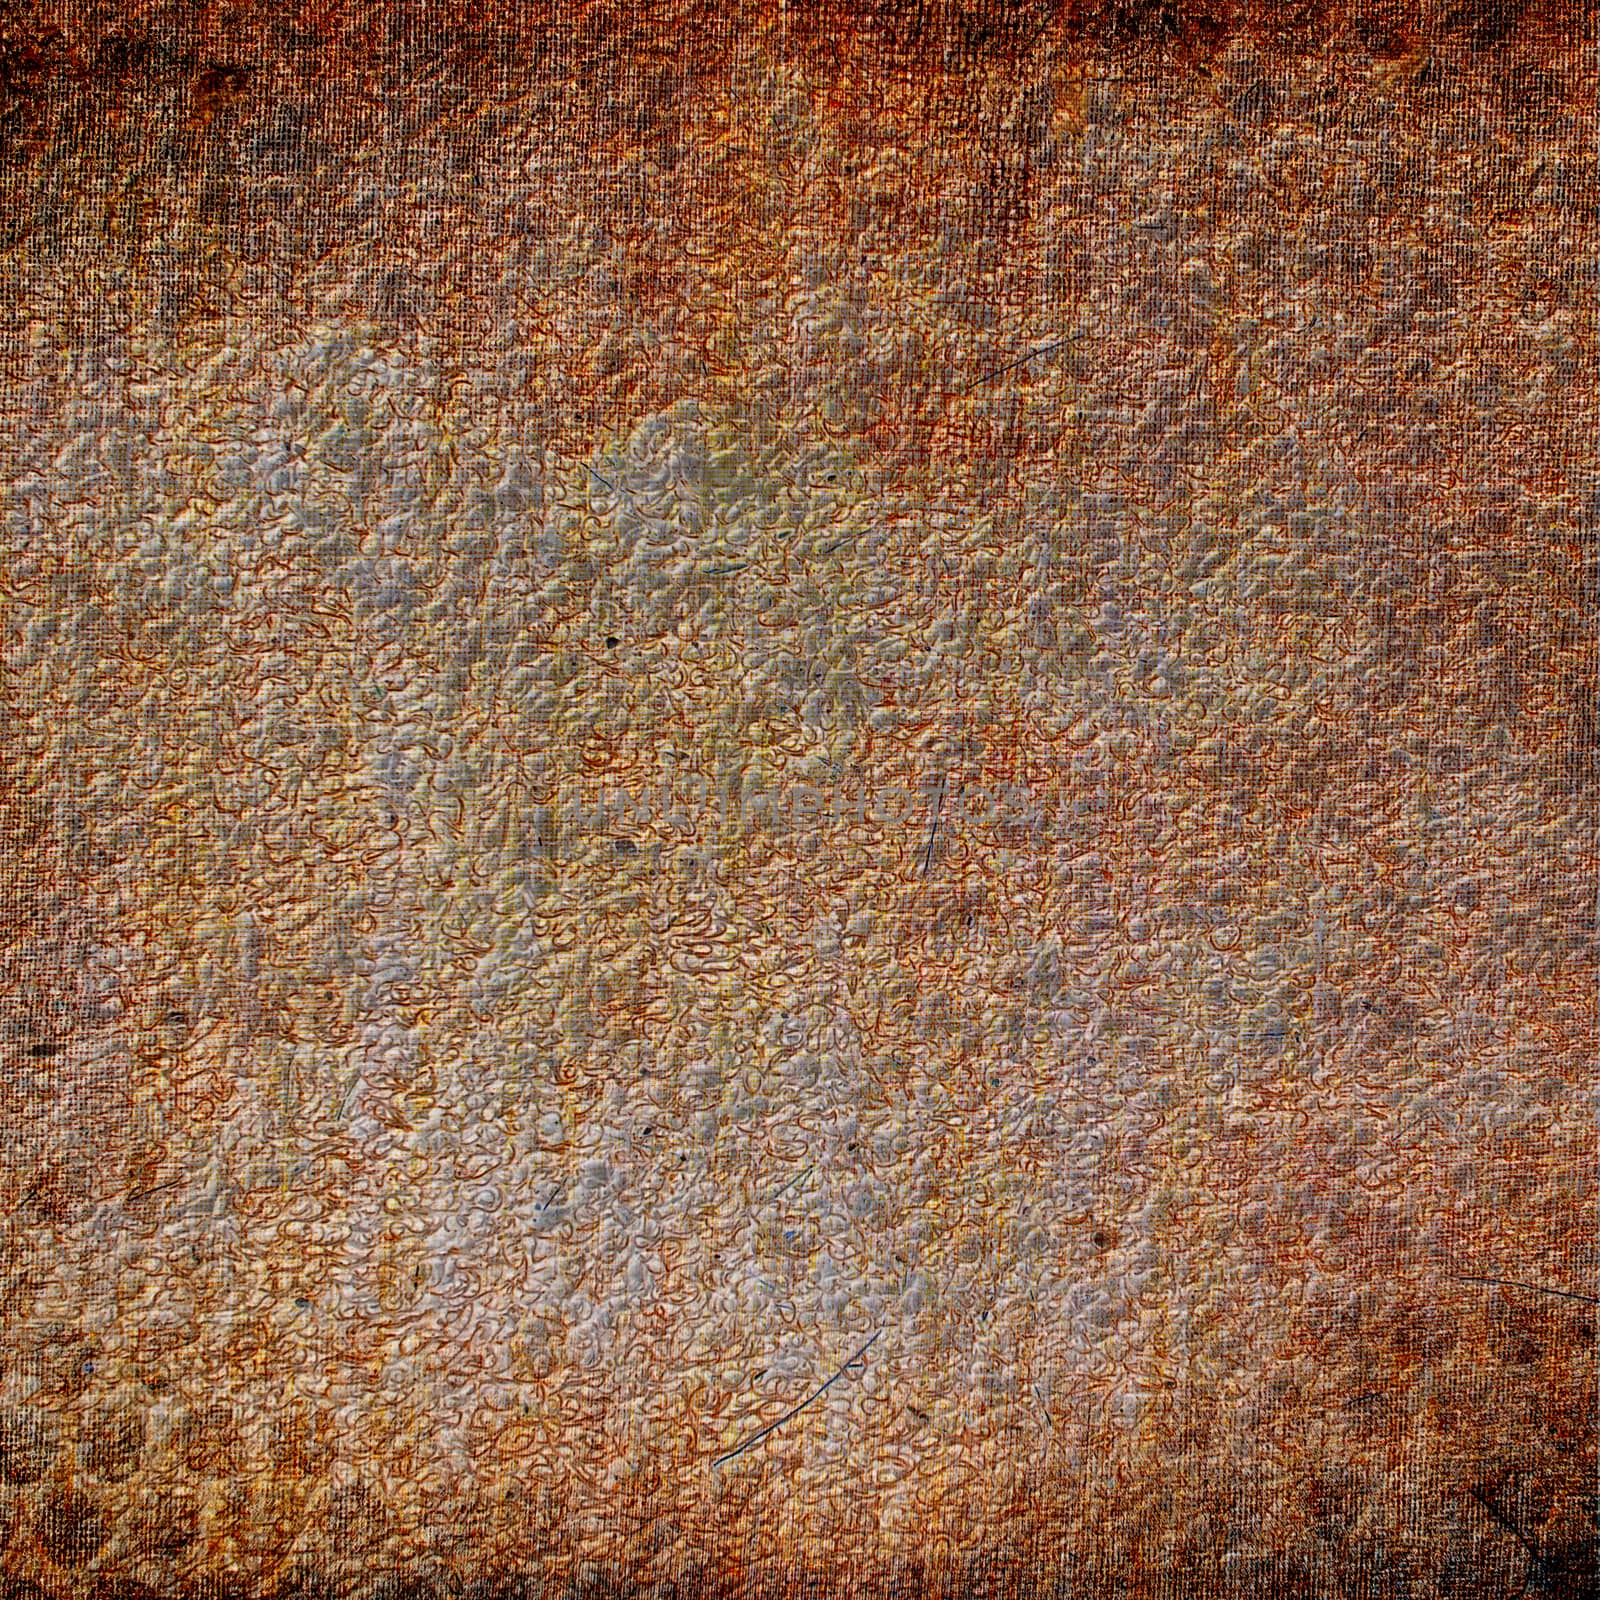 abstract the old grunge wall for background